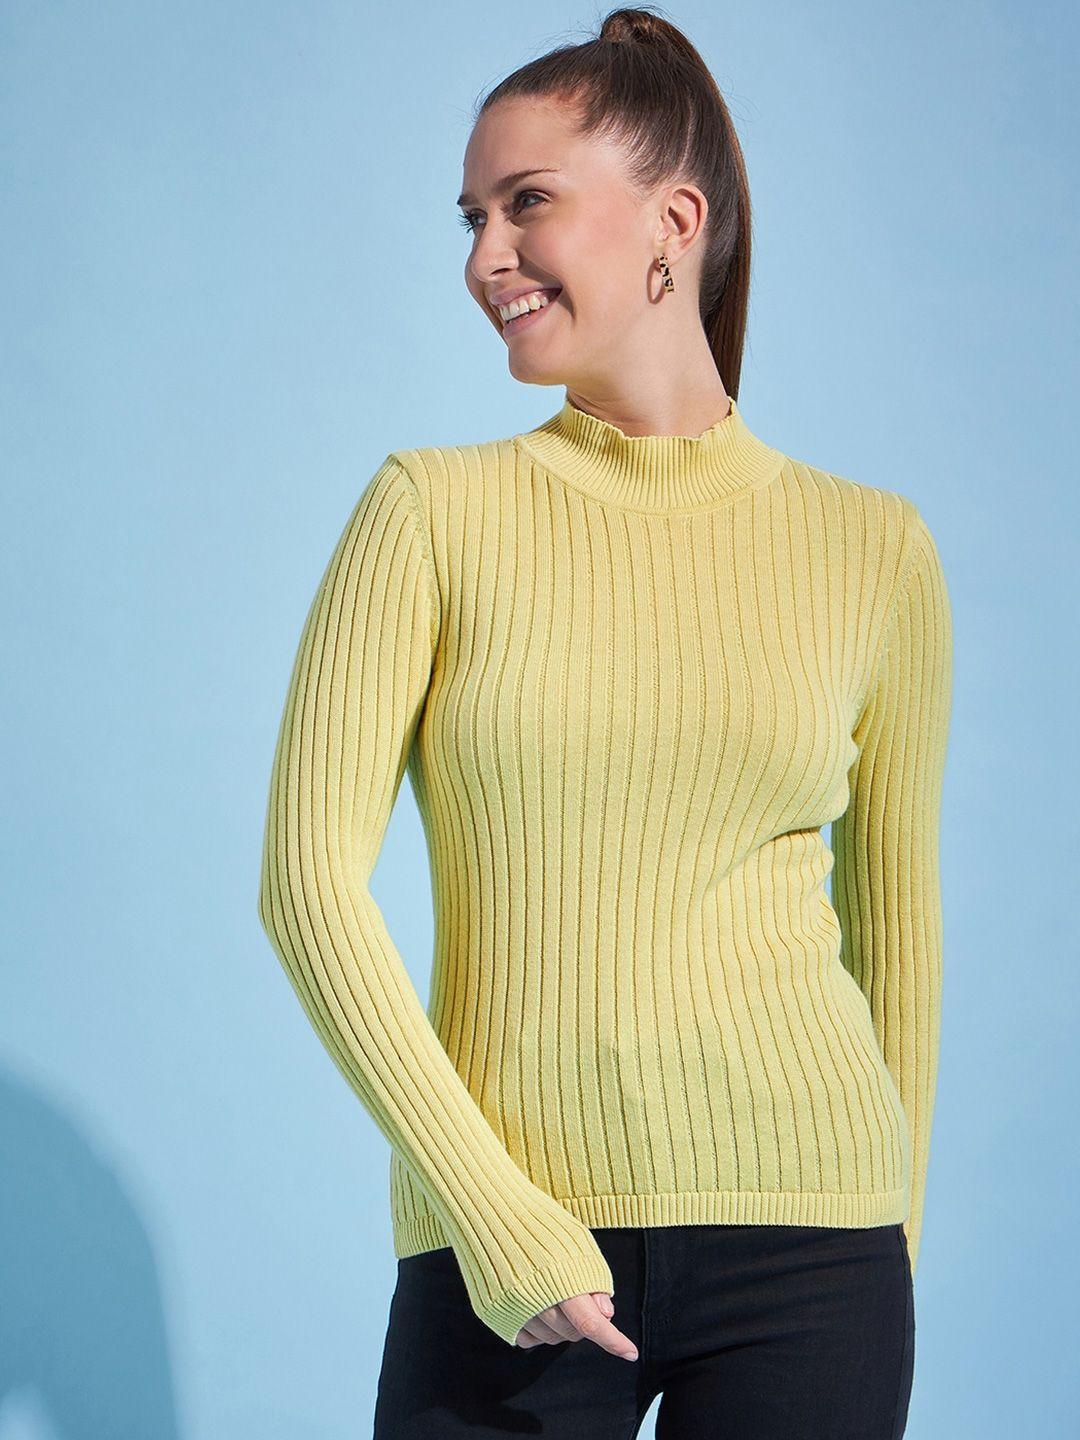 98 degree north ribbed cotton pullover sweater